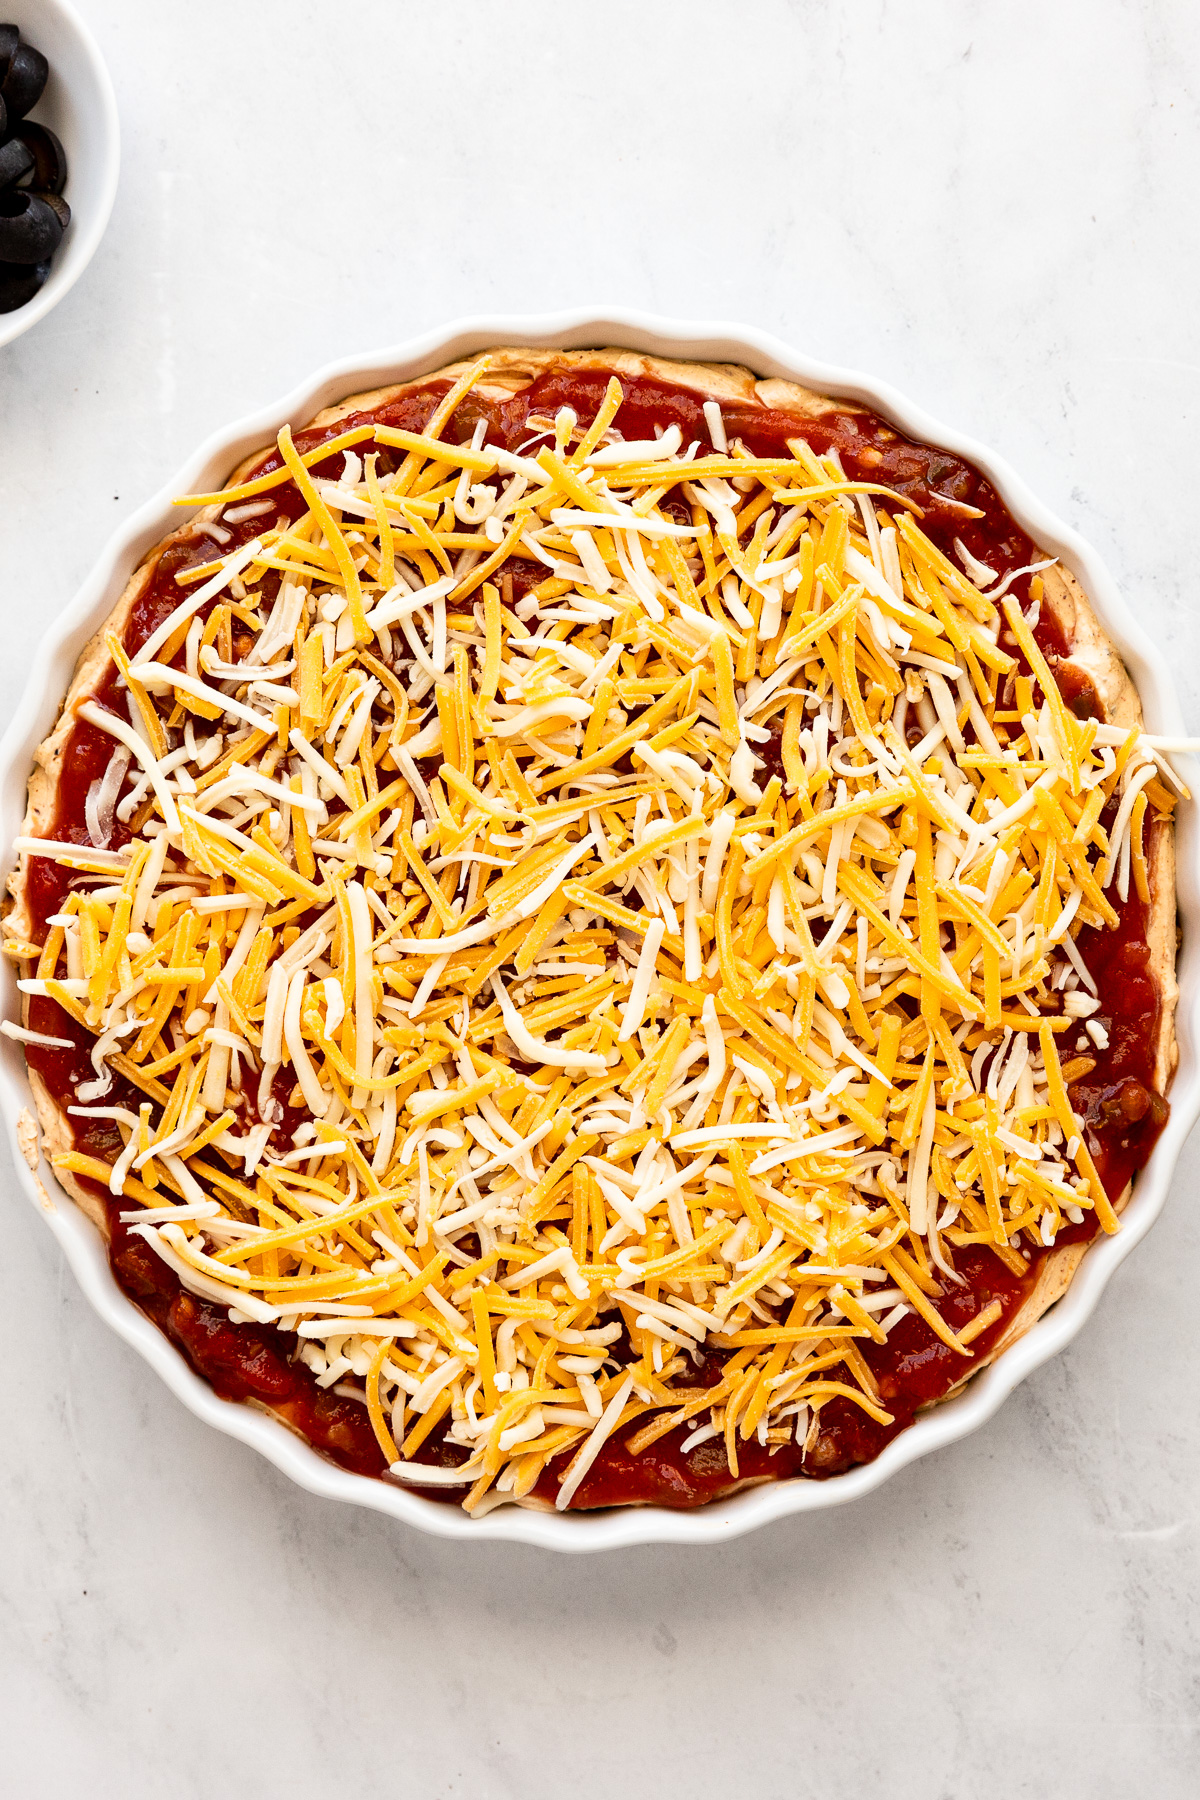 Shredded cheese added to layered dip.